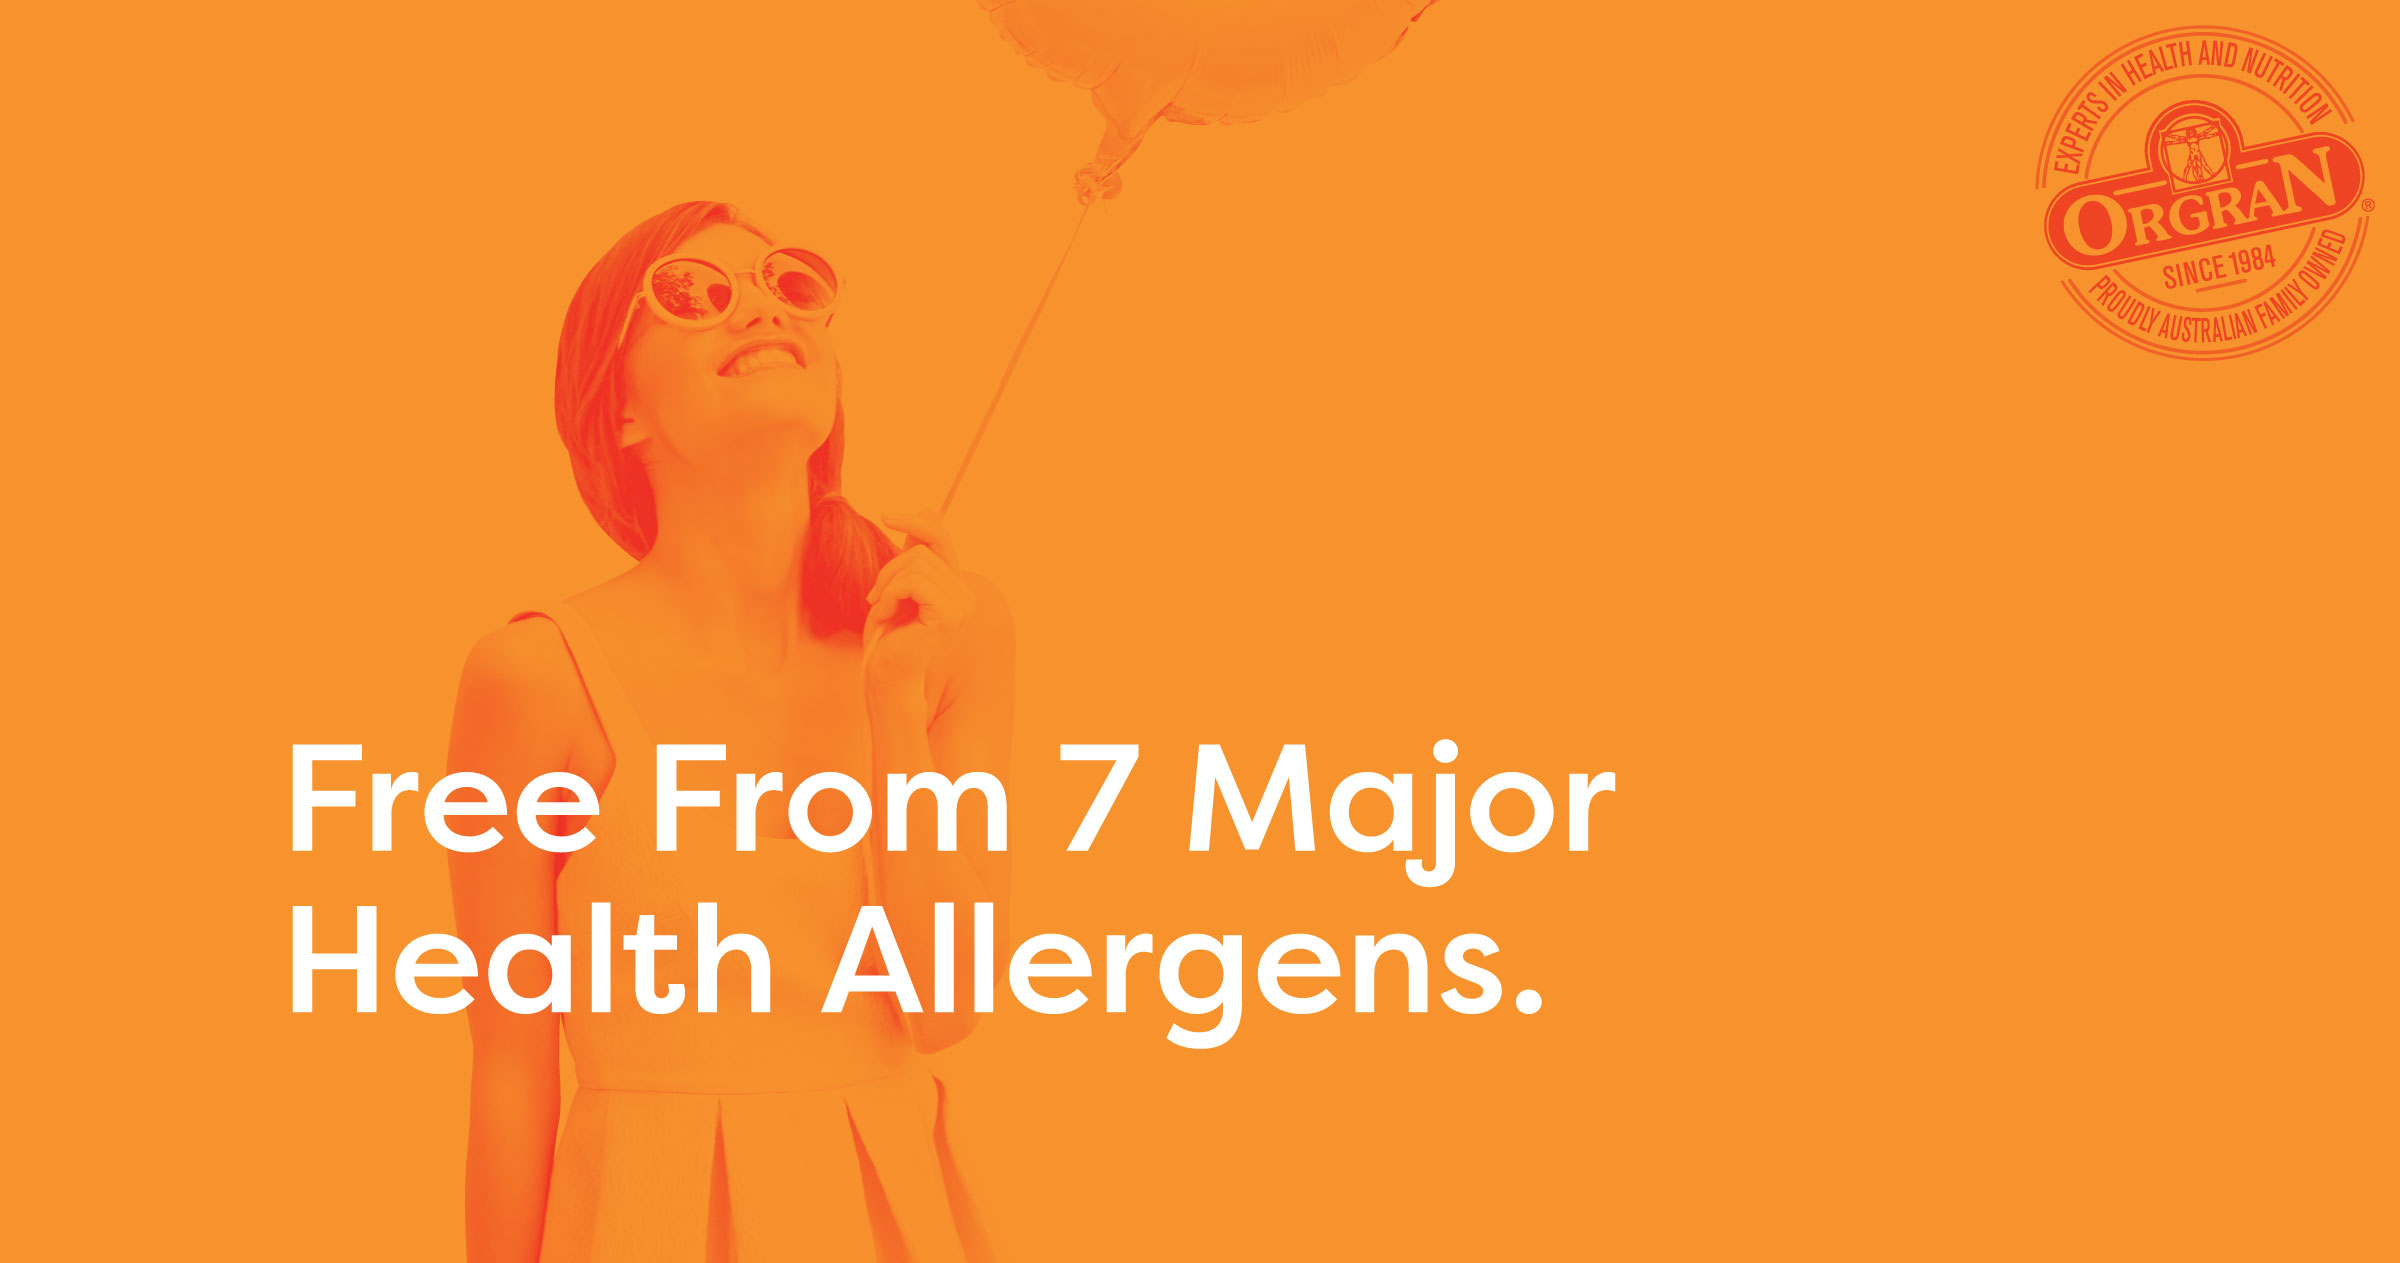 Free from 7 major health allergens.